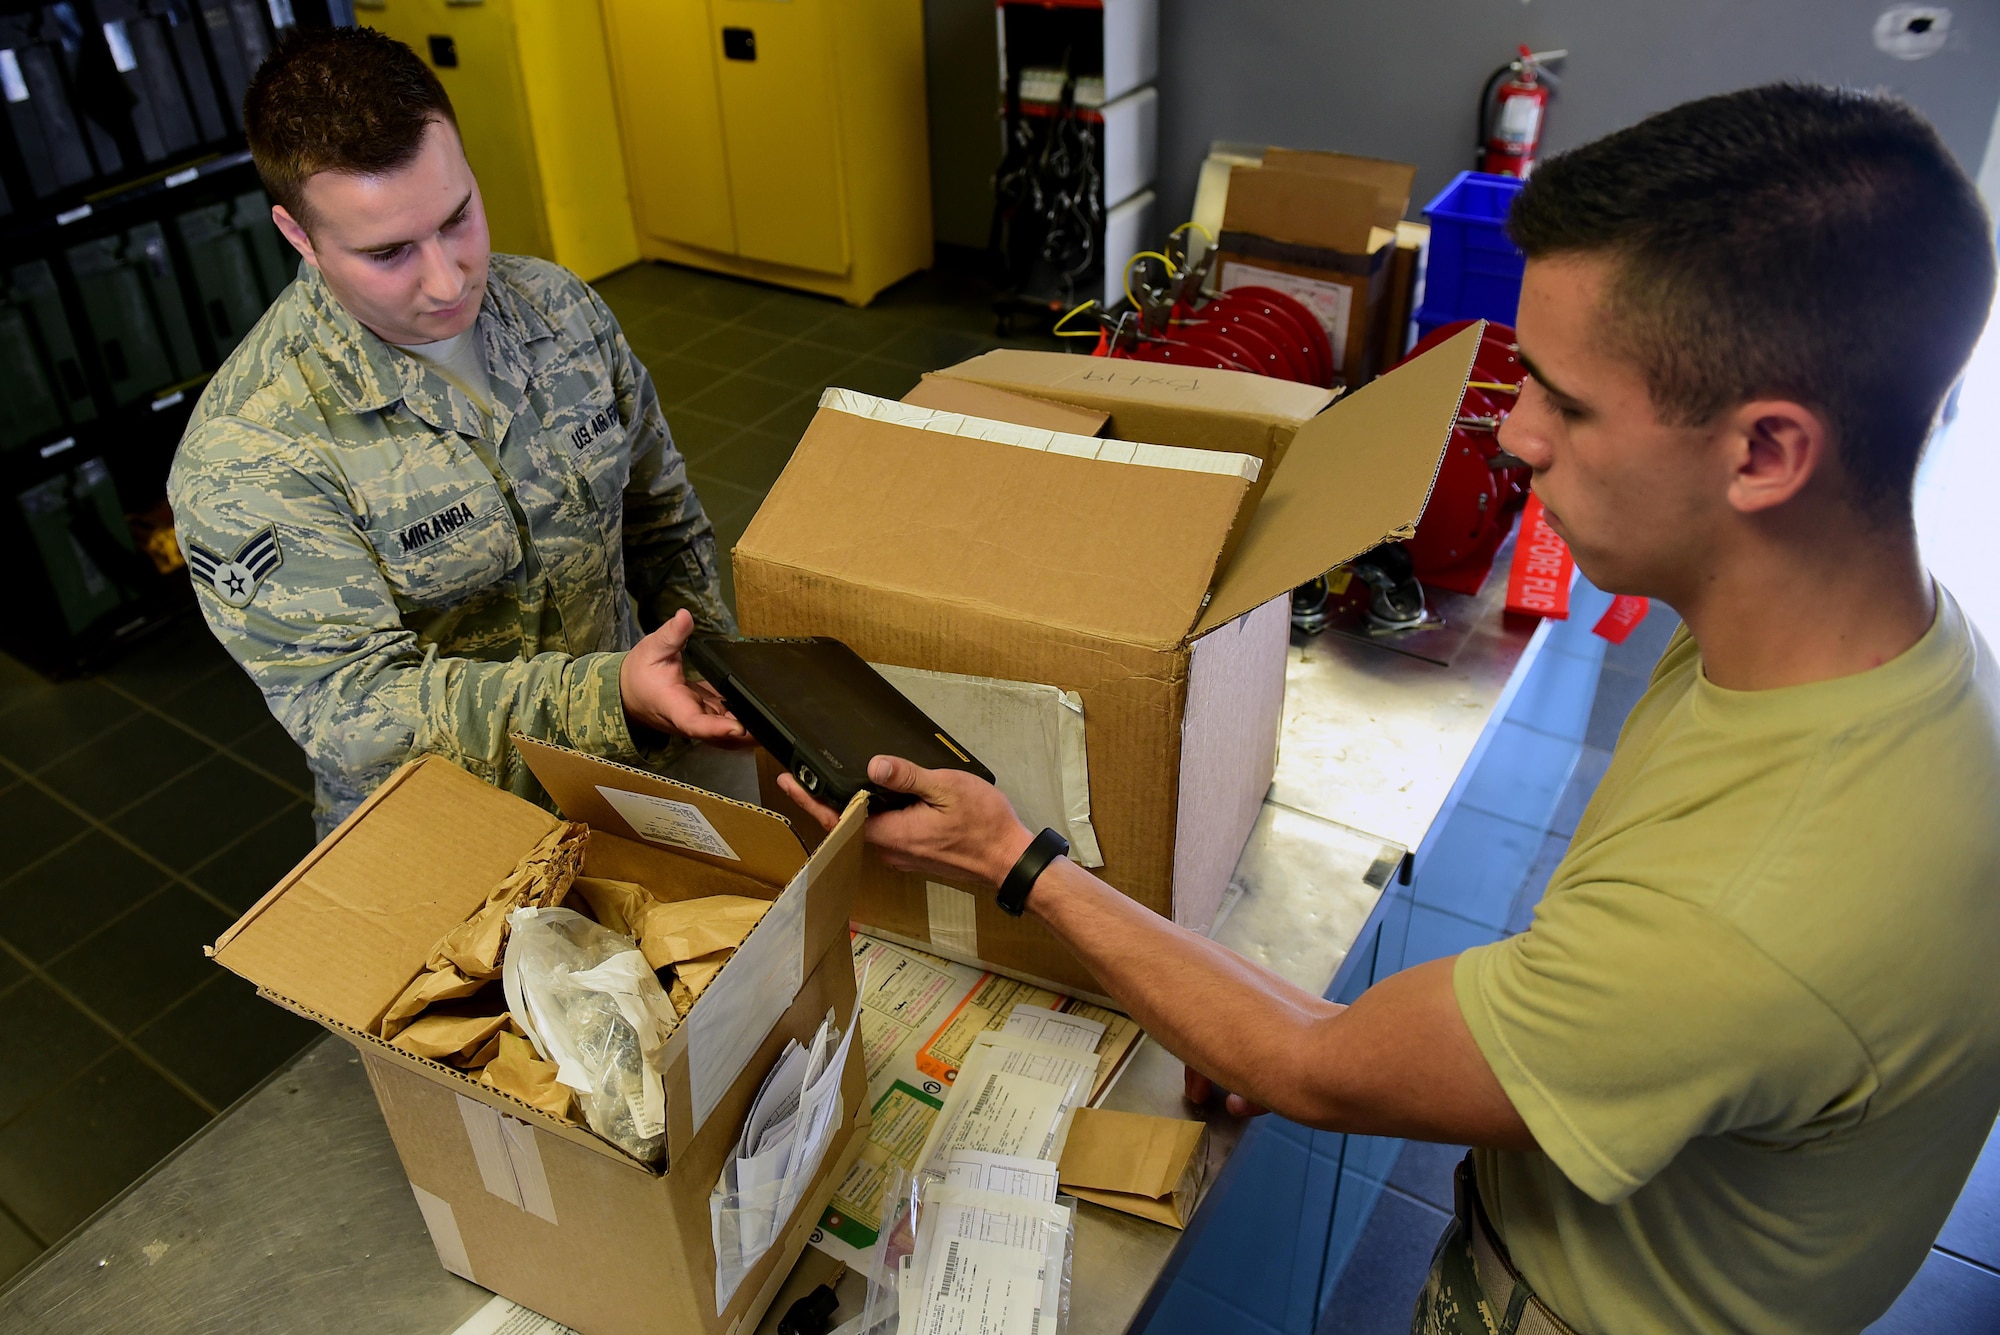 Senior Airman Kevin Miranda, 4th Component Maintenance Squadron aircraft fuel systems journeyman (left), signs for parts April 27, 2017, at Seymour Johnson Air Force Base, North Carolina. Airman 1st Class Brandon Ferguson, 4th Logistics Readiness Squadron driver (right), delivers an average of 200 parts per day across base. (U.S. Air Force photo by Airman 1st Class Kenneth Boyton)